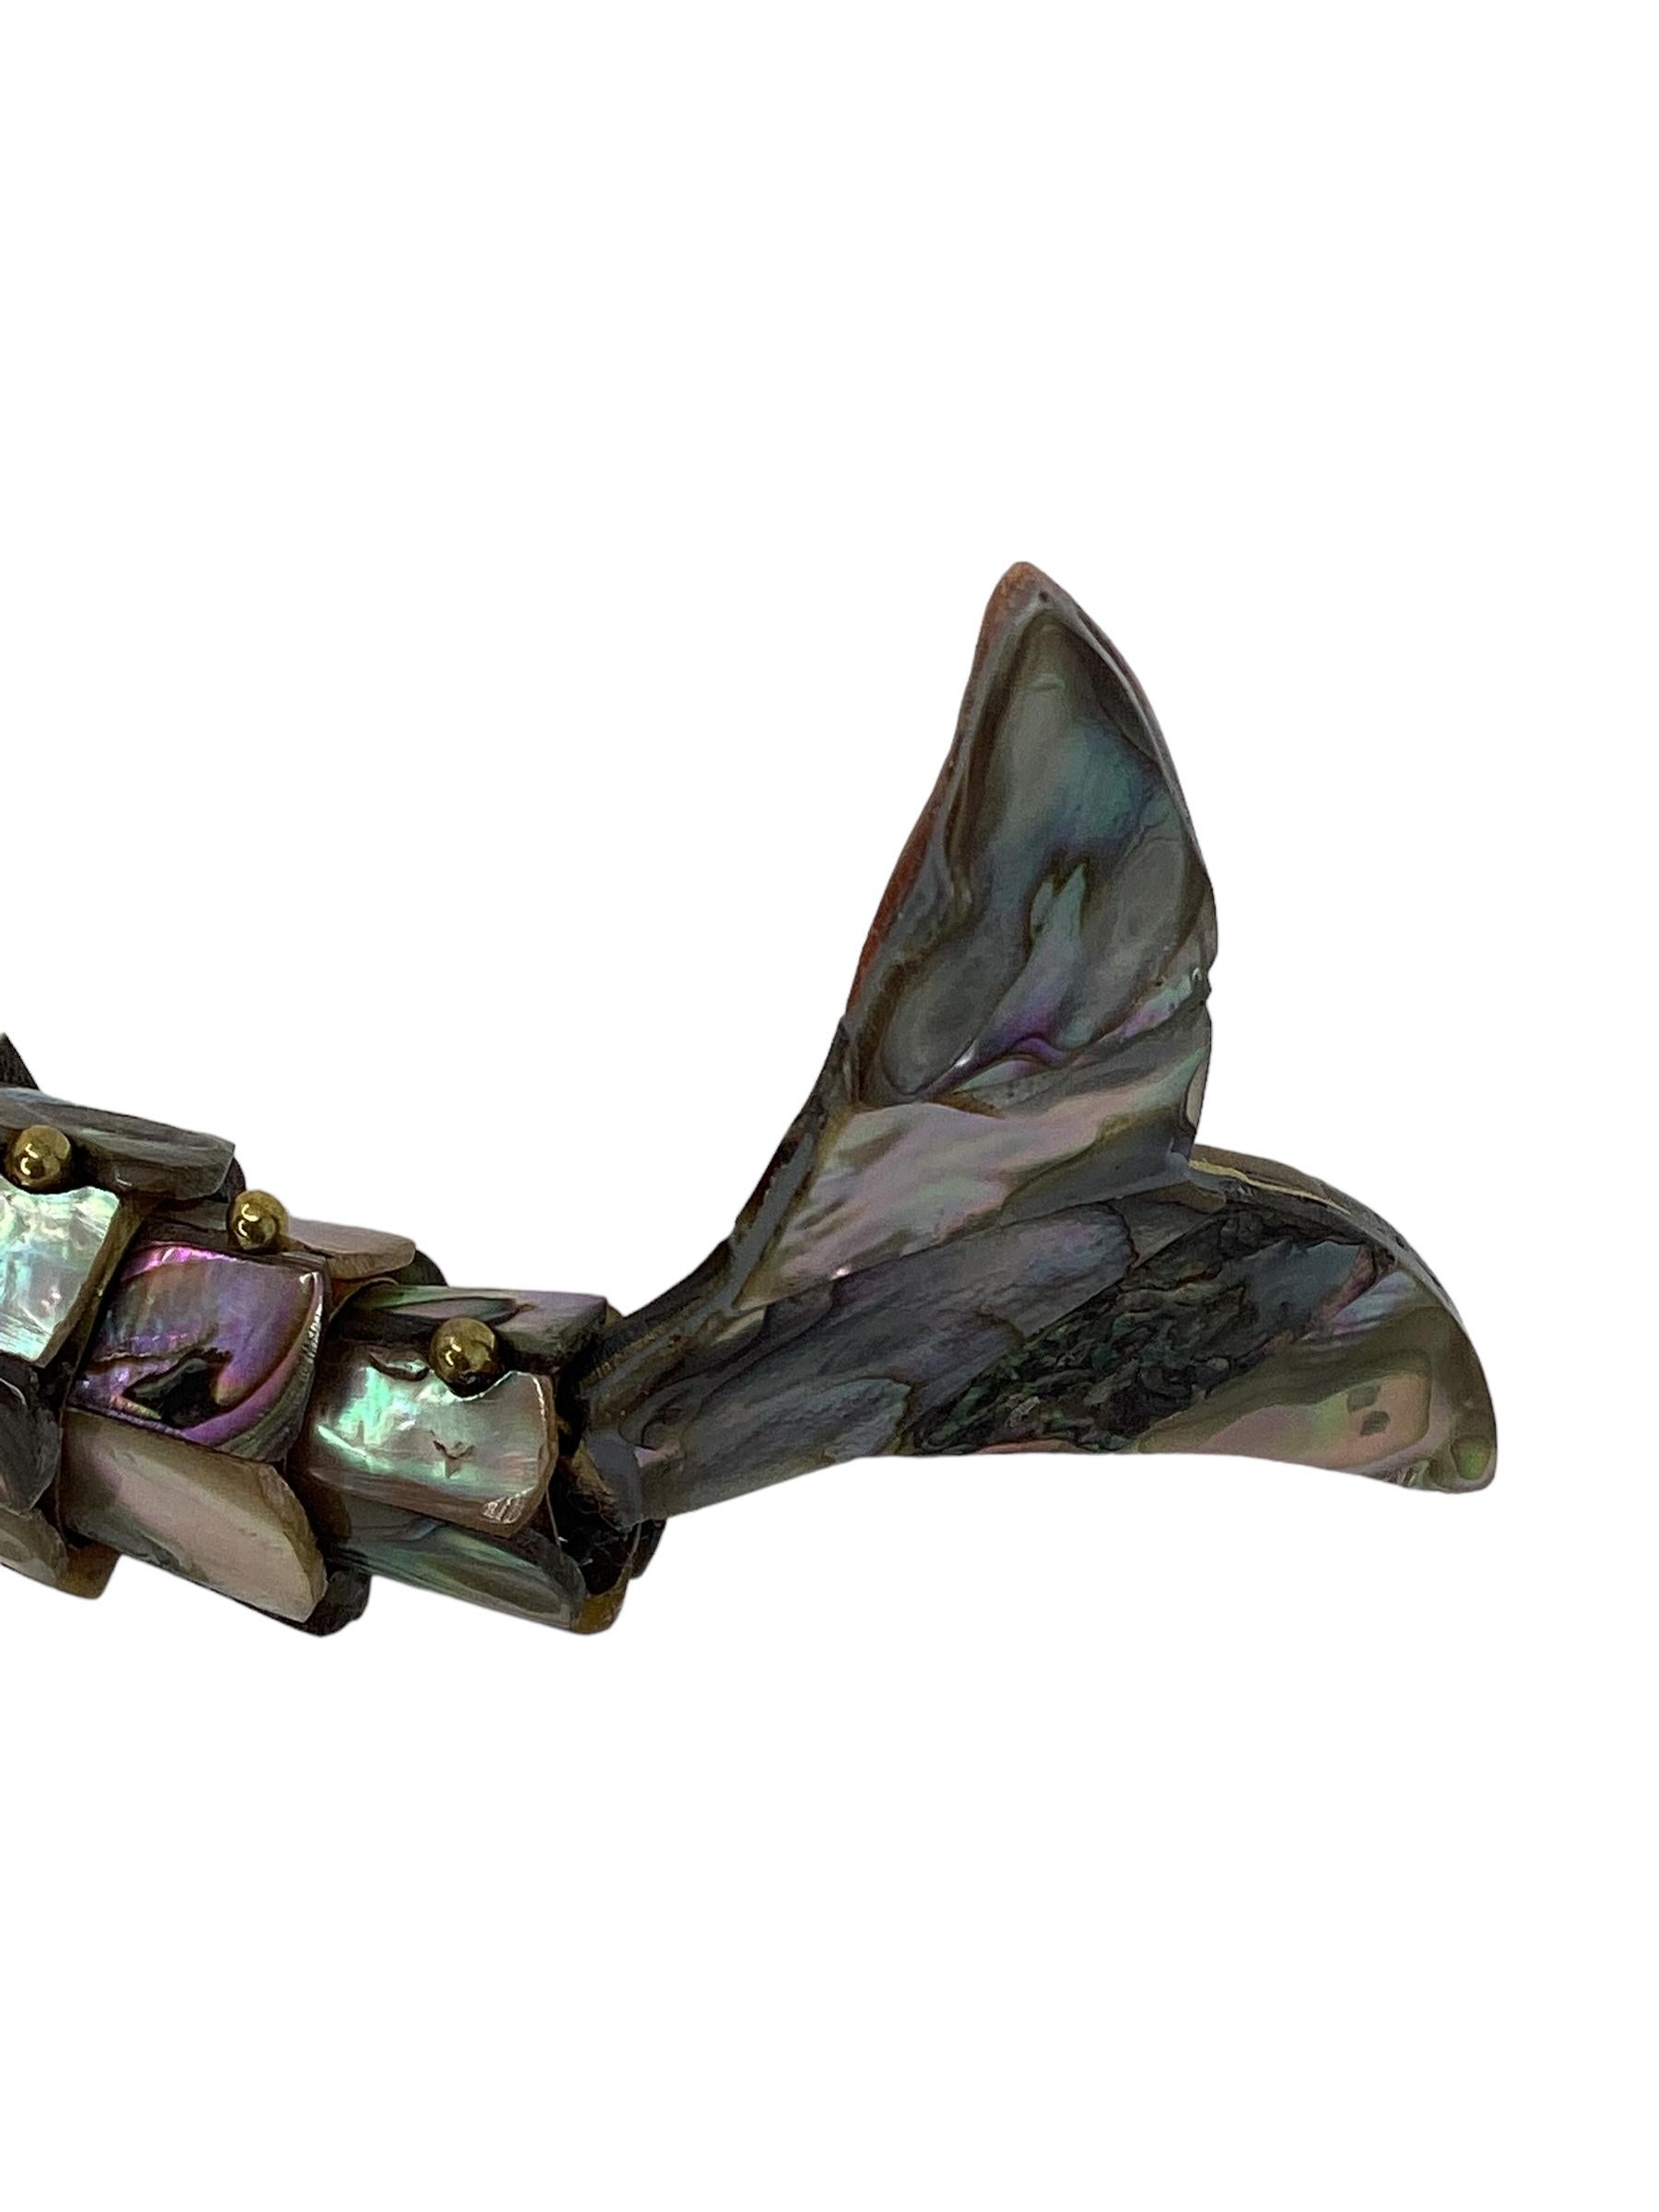 Vintage Mexican Articulated Abalone Fish Bottle Opener. Colorful abalone tiles adorn the fish figure. A fun addition to any bar.